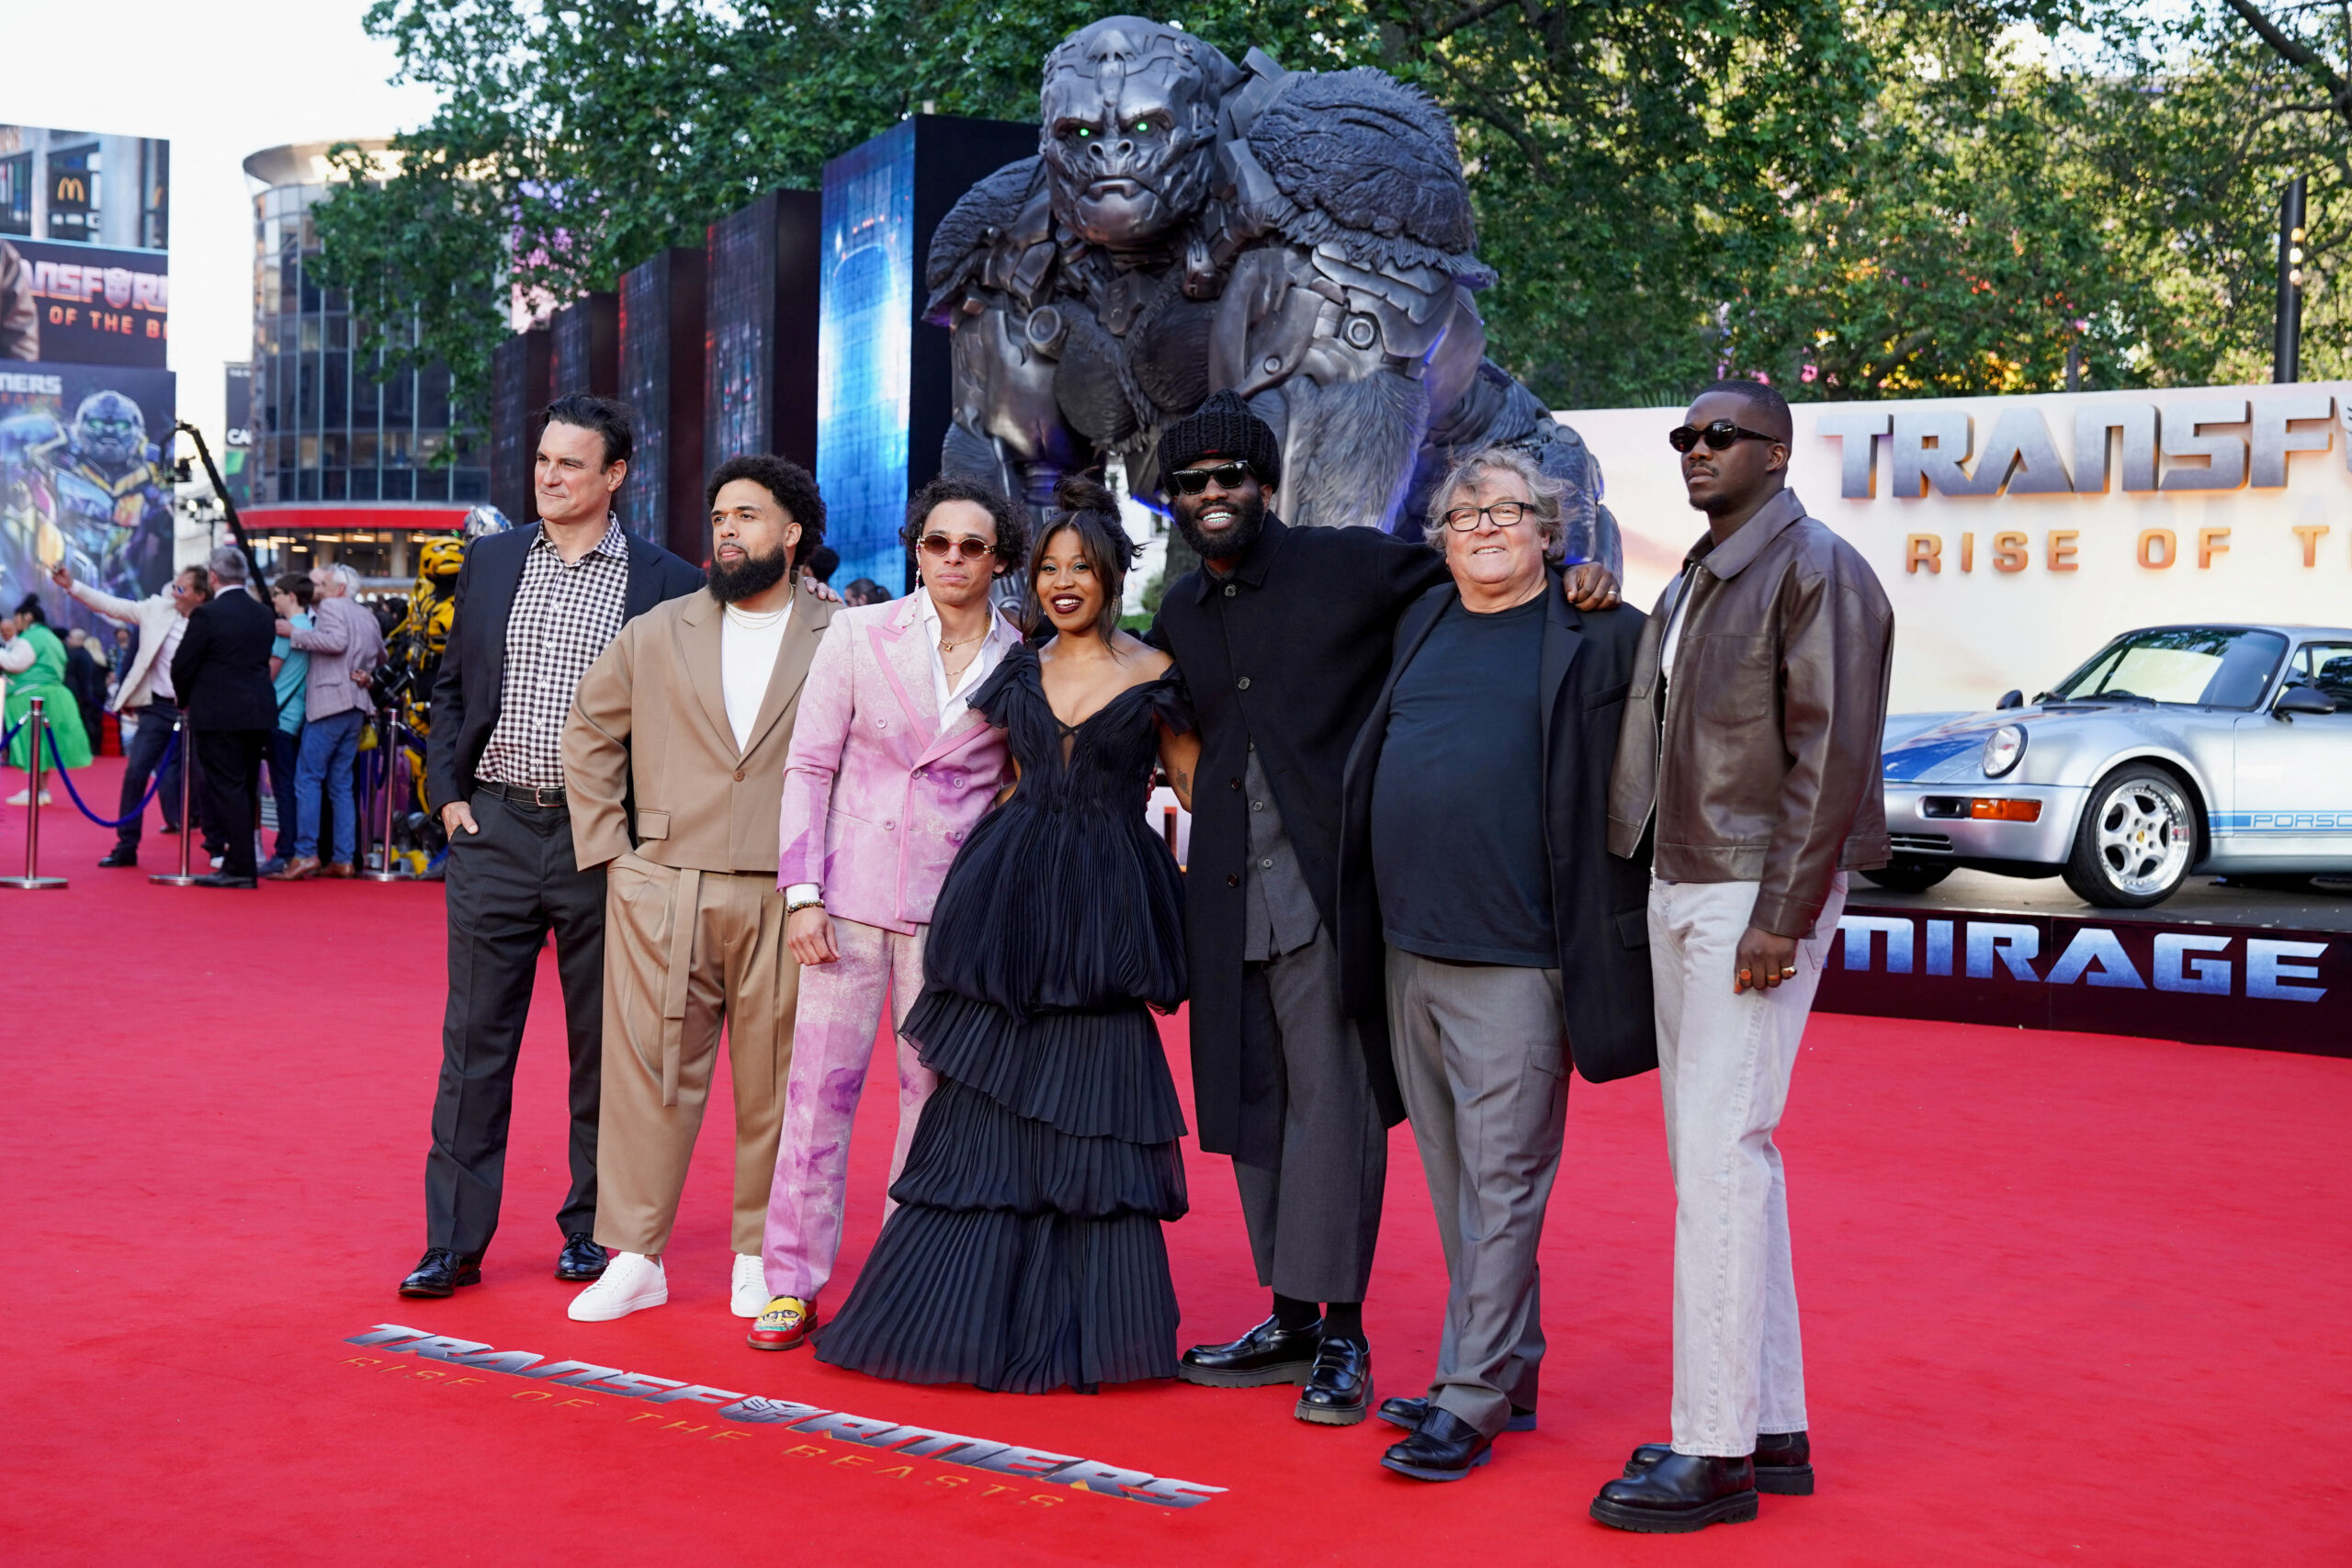 Producer Mark Vahradian, Director Steven Caple Jr., Producer Lorenzo Di Bonaventura, cast members Dominique Fishback, Anthony Ramos and Tobe Nwigwe attend the European premiere of Transformers: Rise of the Beasts in Leicester Square, London, Britain, June 7, 2023, REUTERS/Maja Smiejkowska